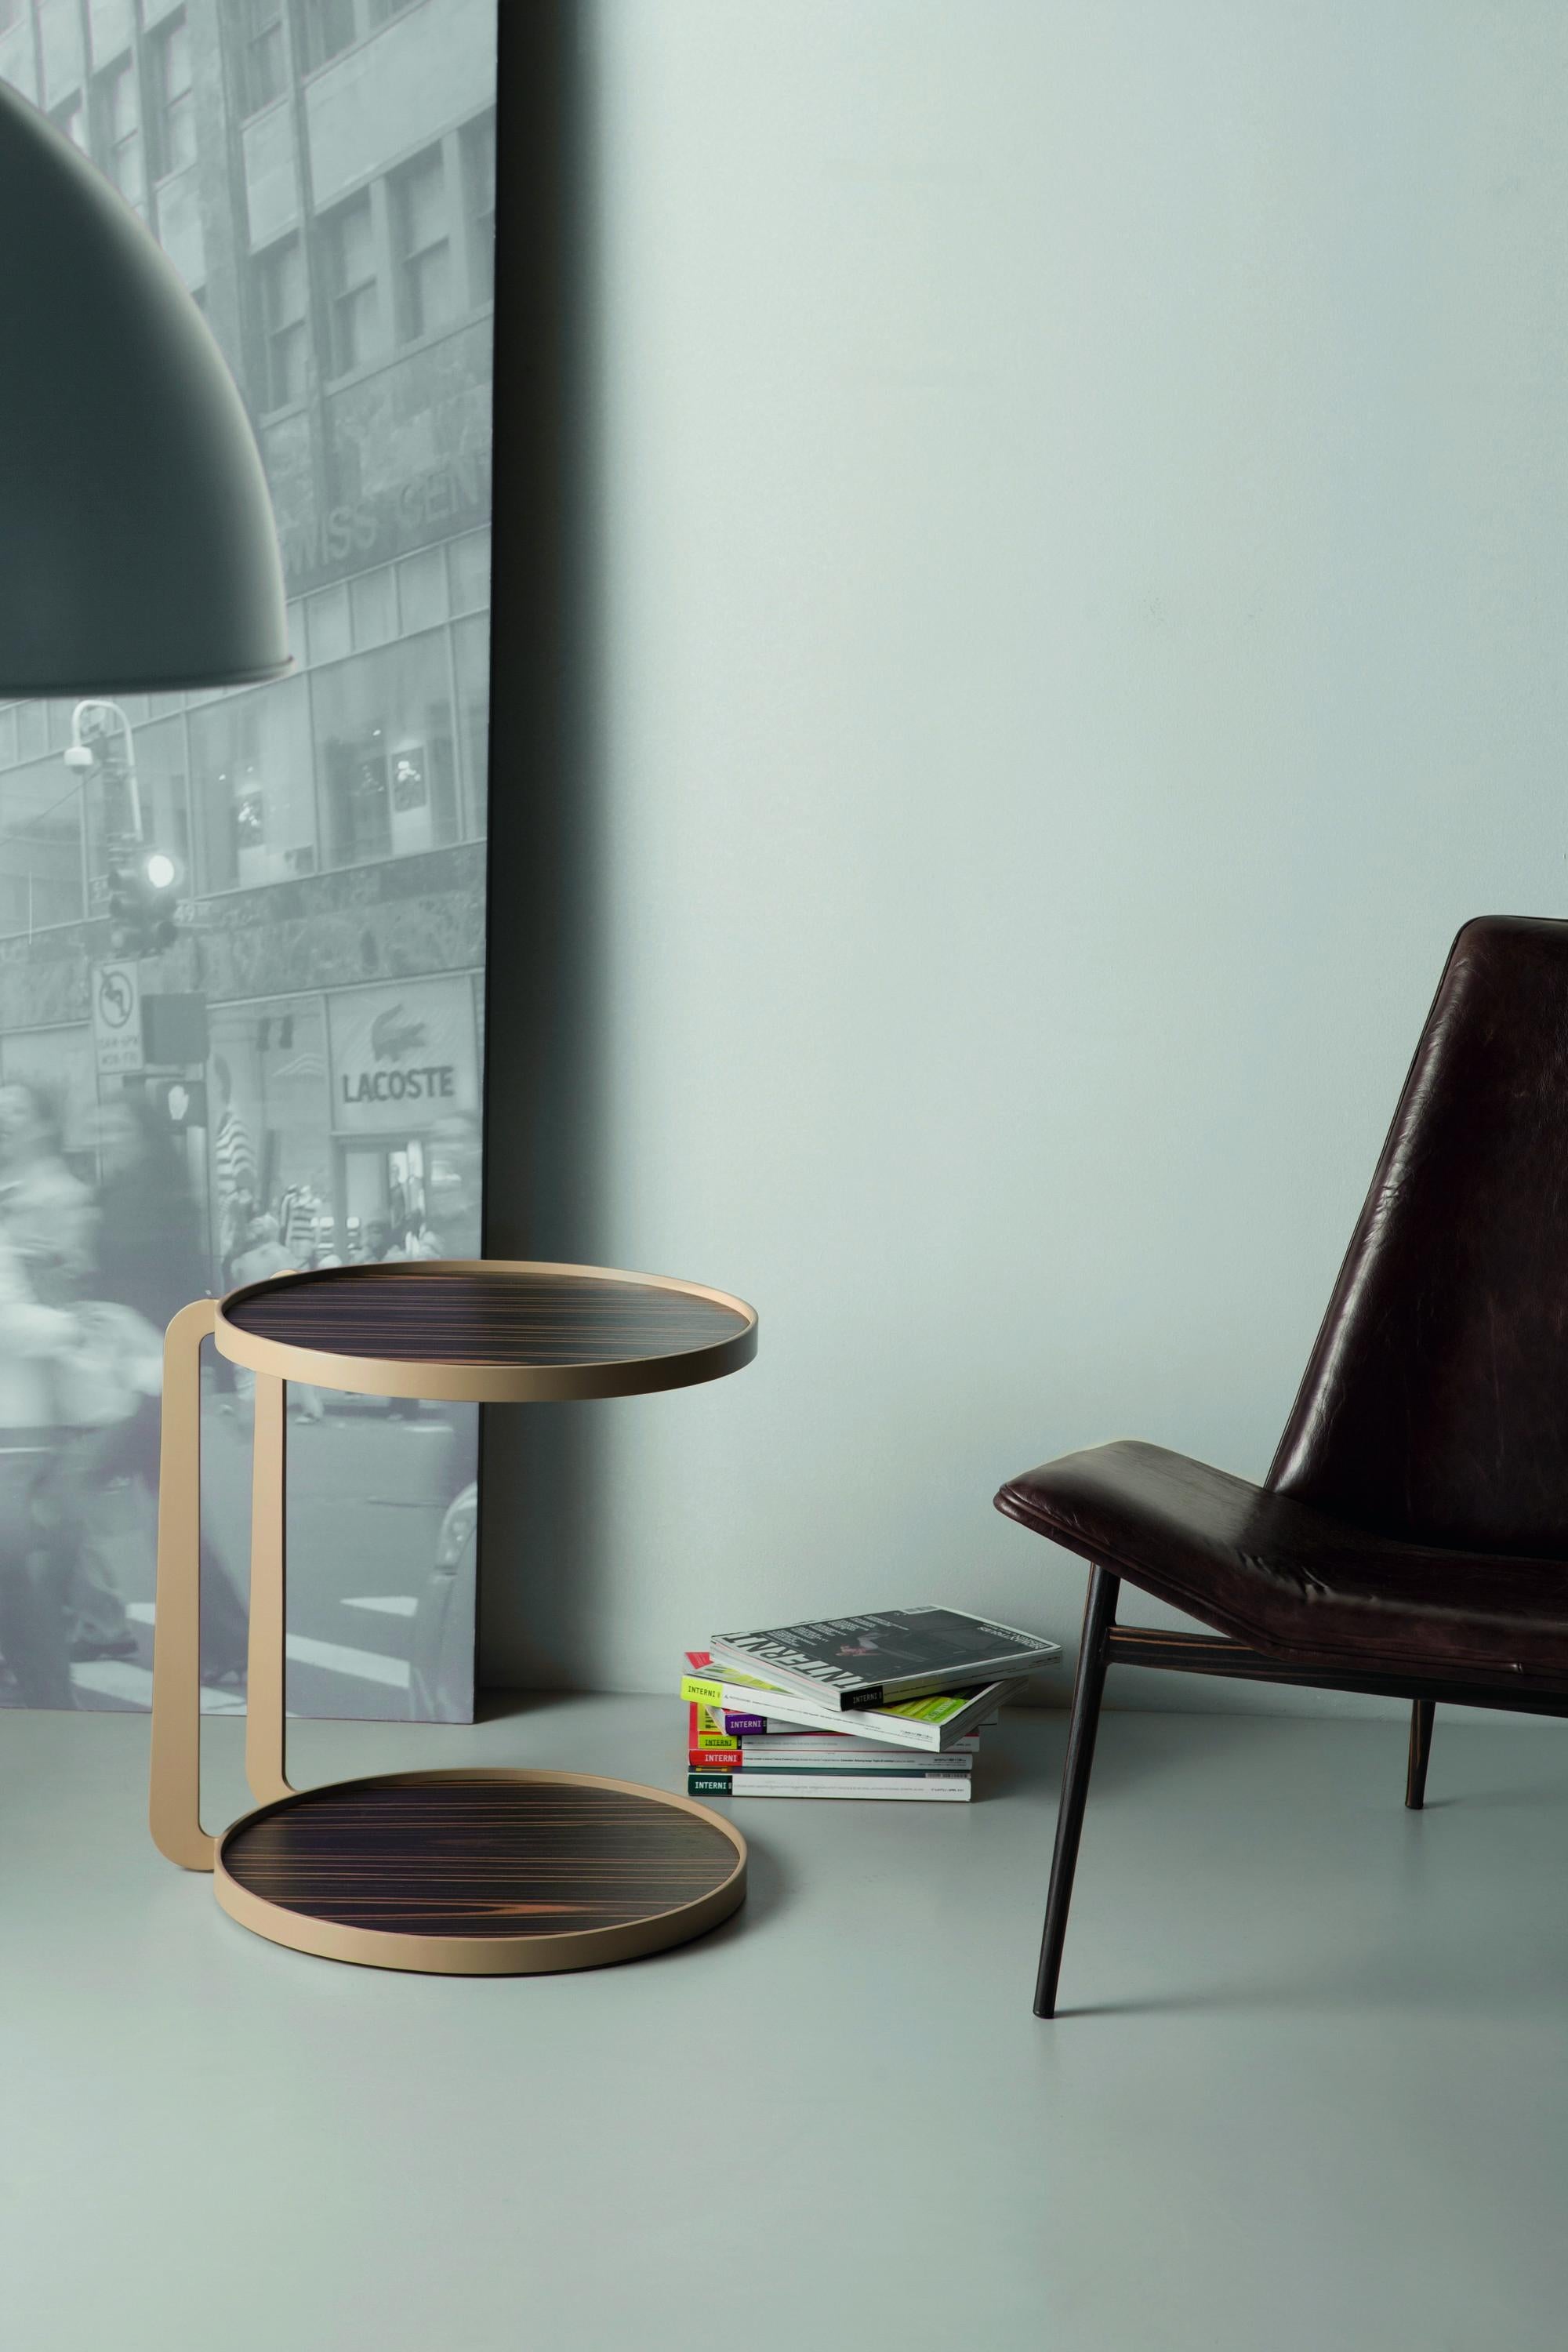 Pro Side Table by Doimo Brasil
Dimensions:  D 50 x H 55 cm 
Materials: Base: Aged steel, Top Inferior: veneer or lacquer, Top: veneer or lacquer. 


With the intention of providing good taste and personality, Doimo deciphers trends and follows the